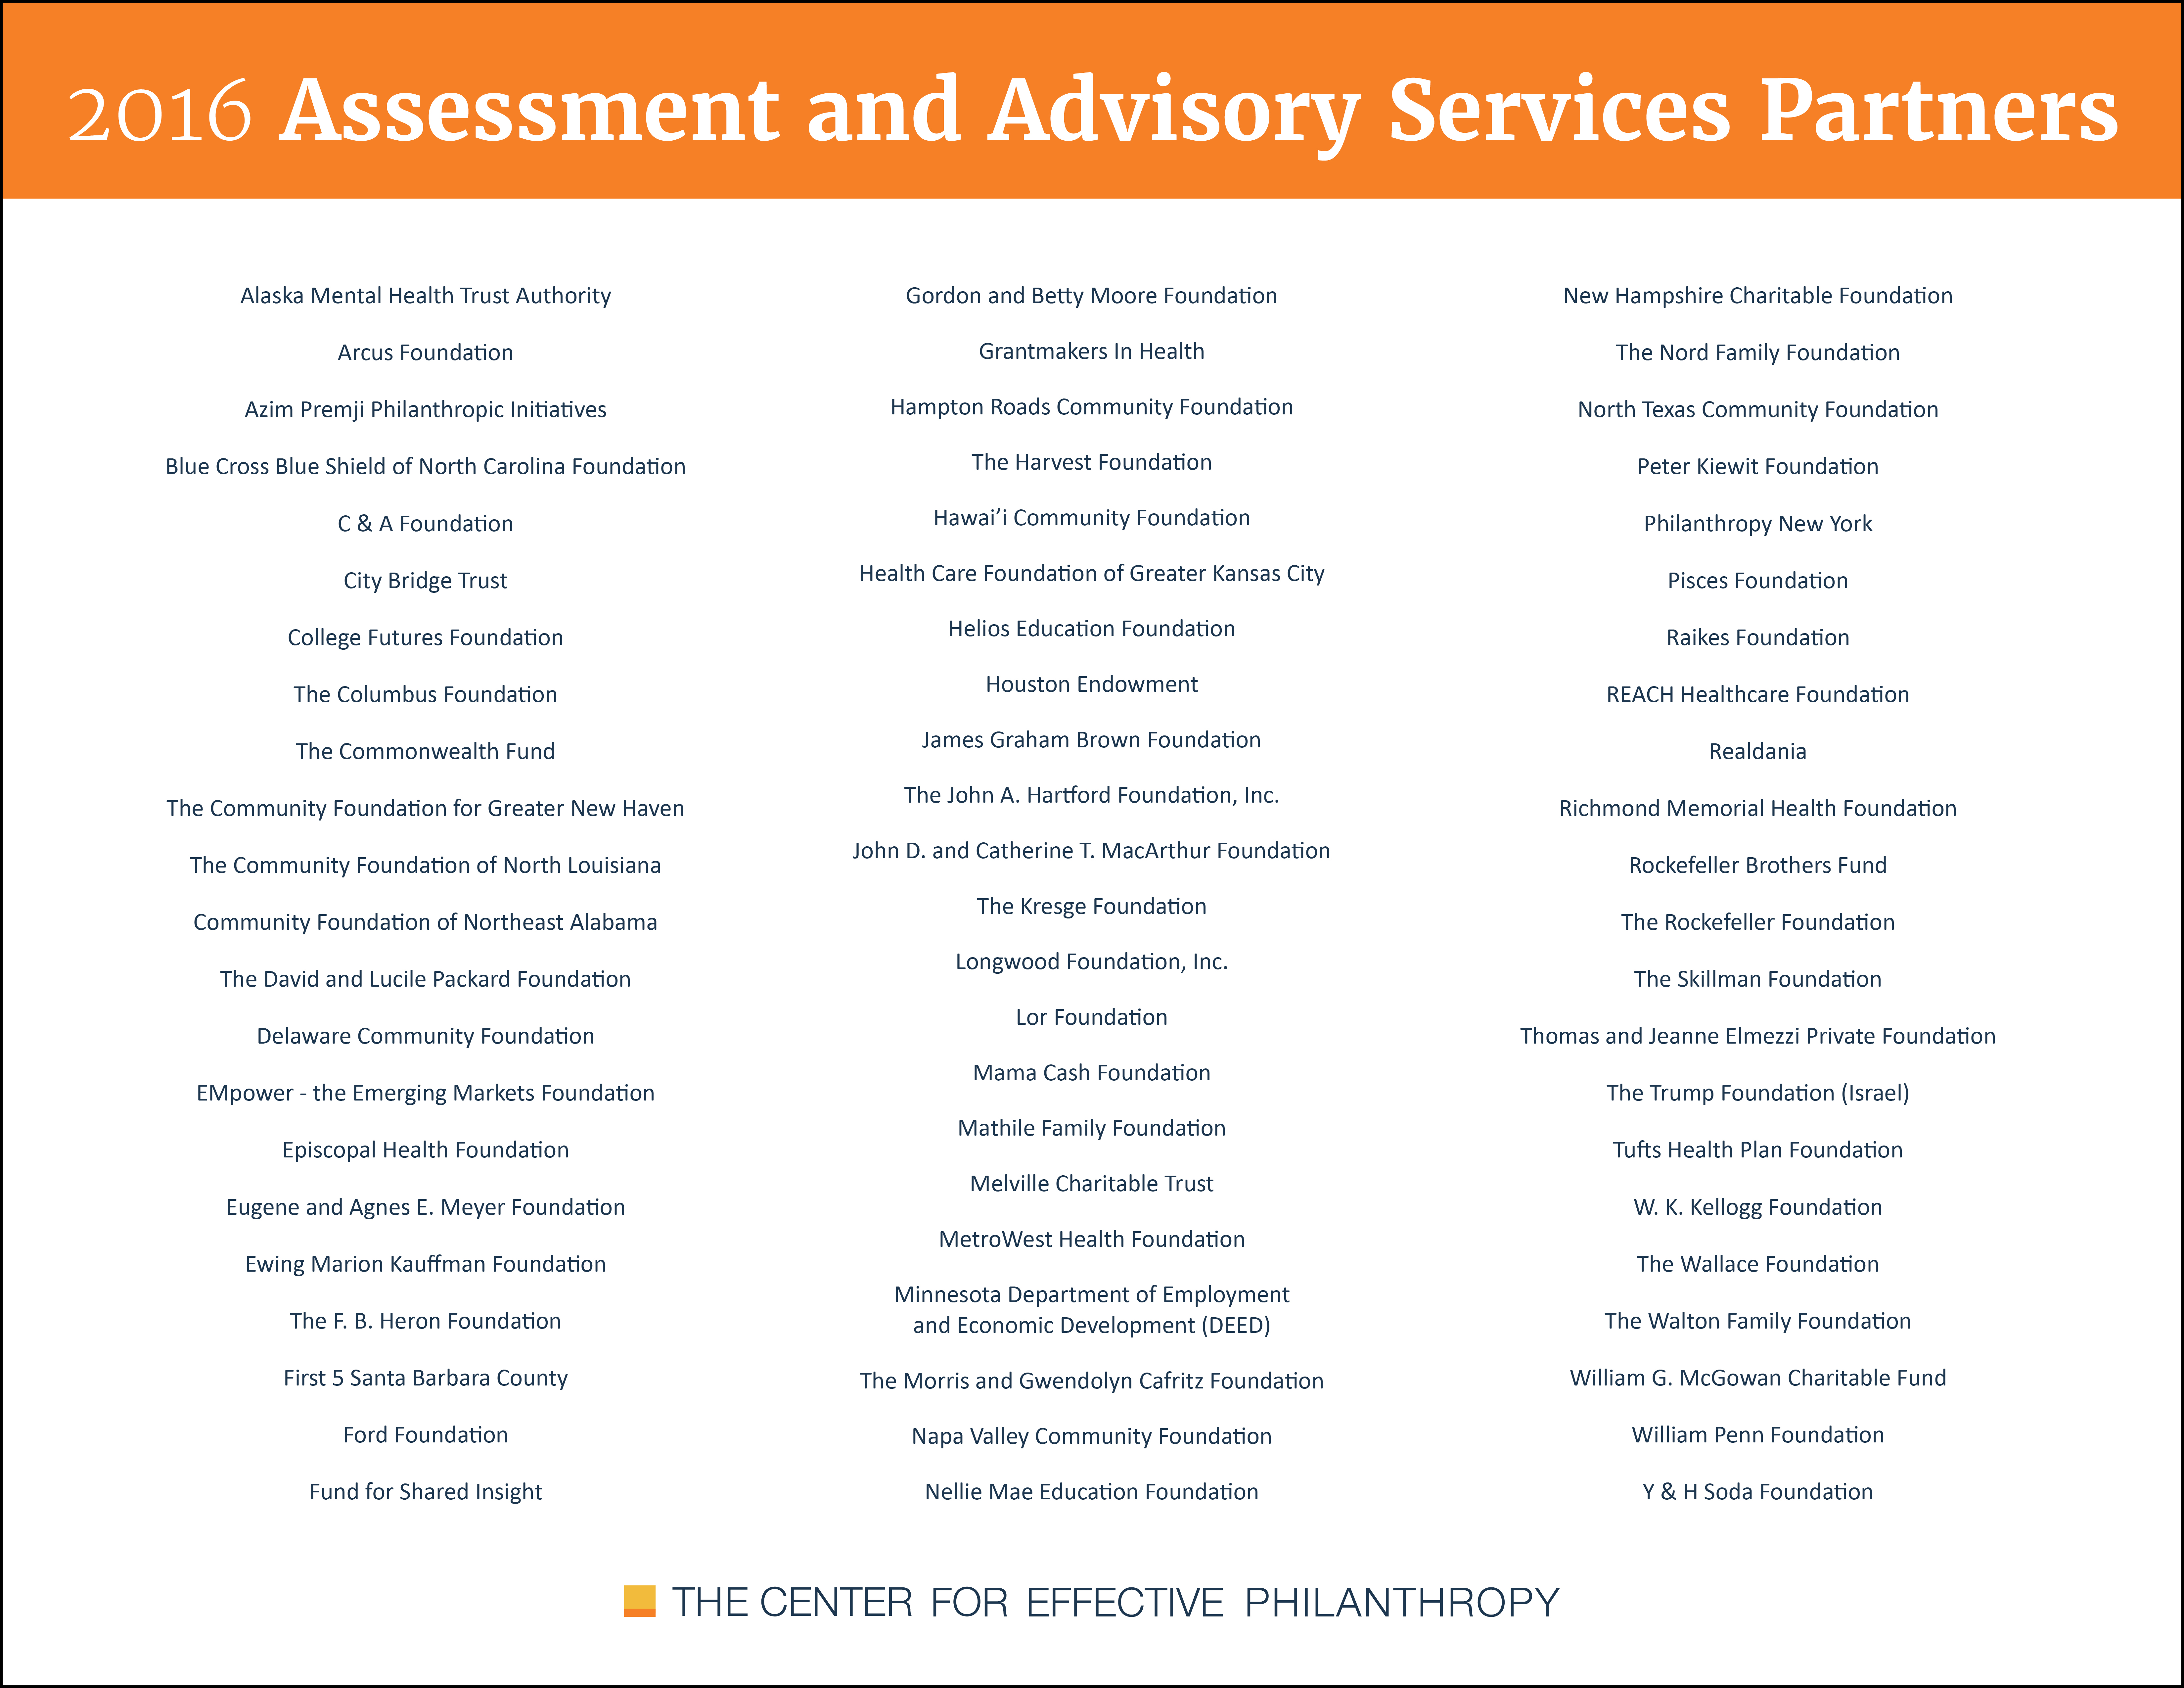 cep-assessment-advisory-services-partners-2016